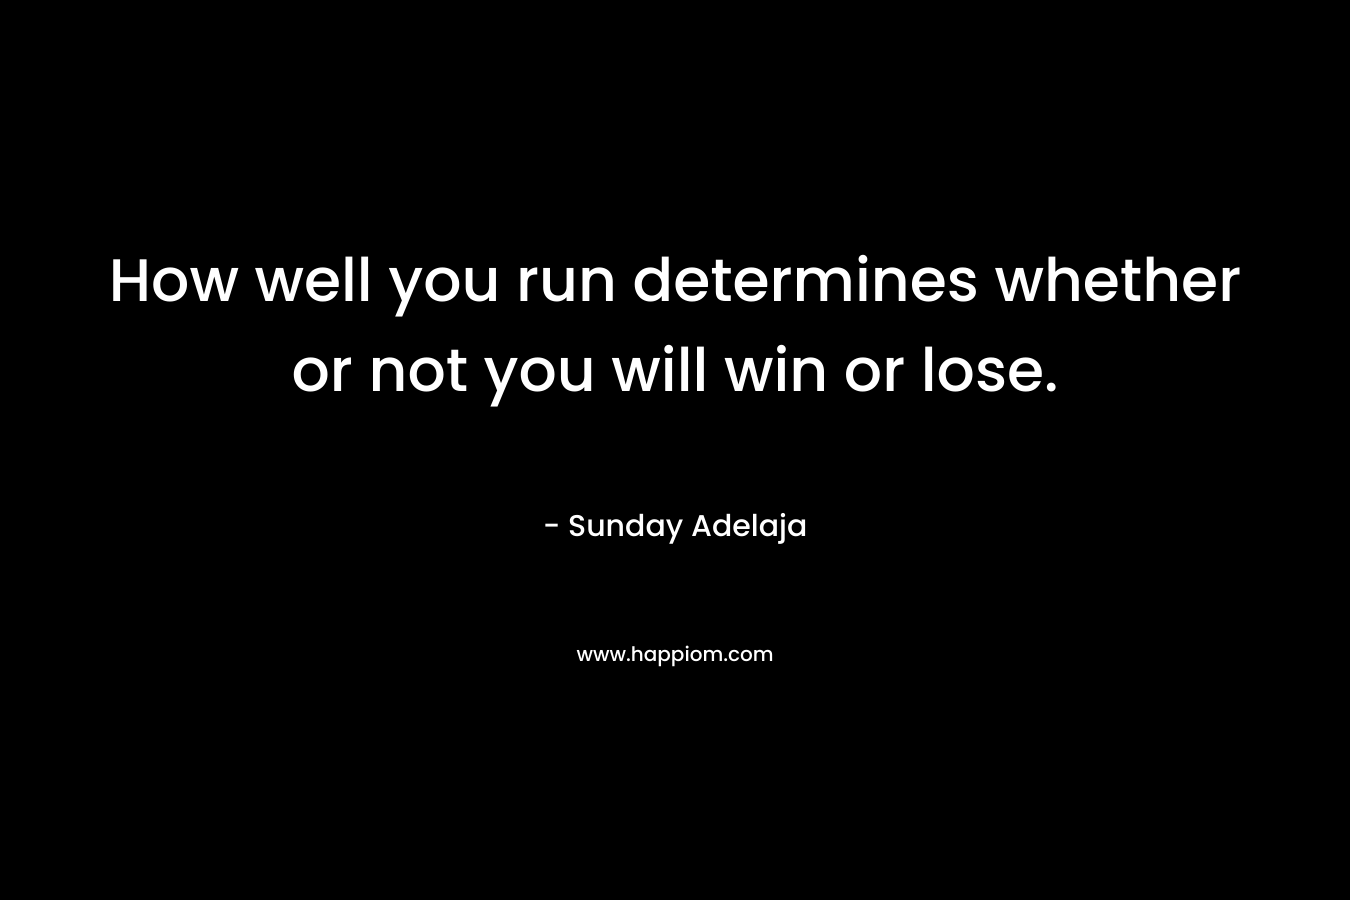 How well you run determines whether or not you will win or lose.